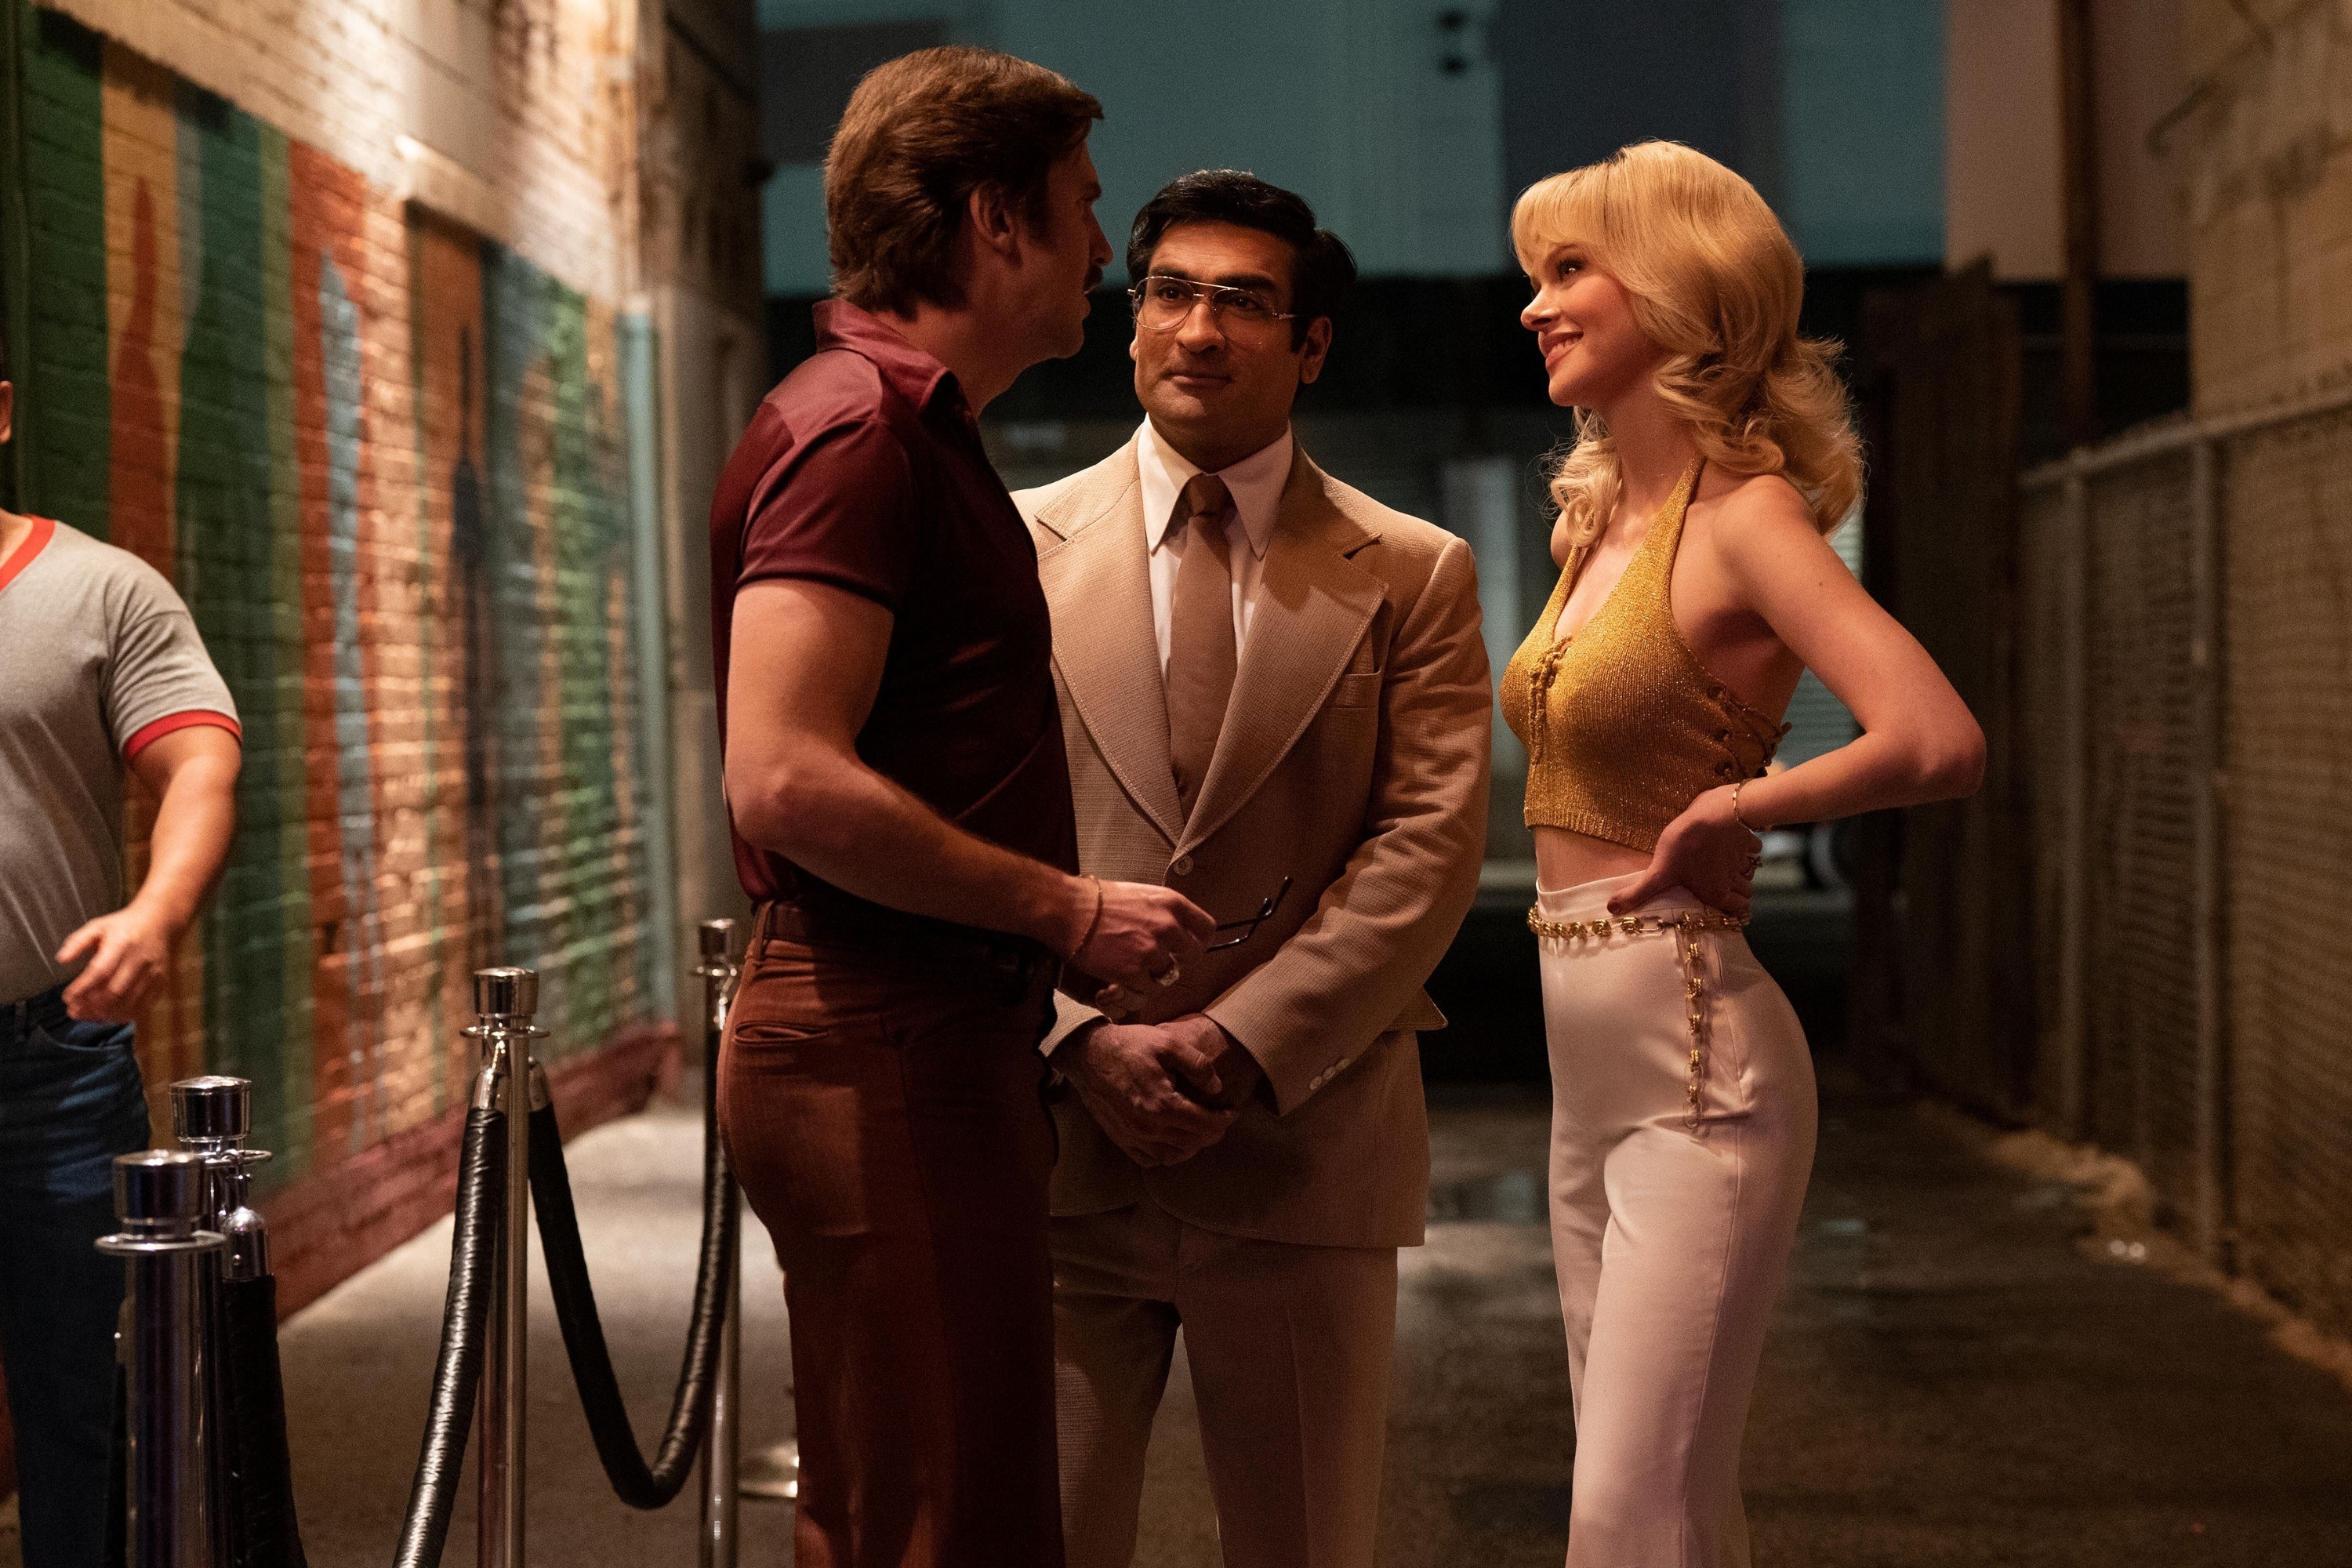 Banerjee and Snider talking to a woman outside of a club in a scene from the miniseries